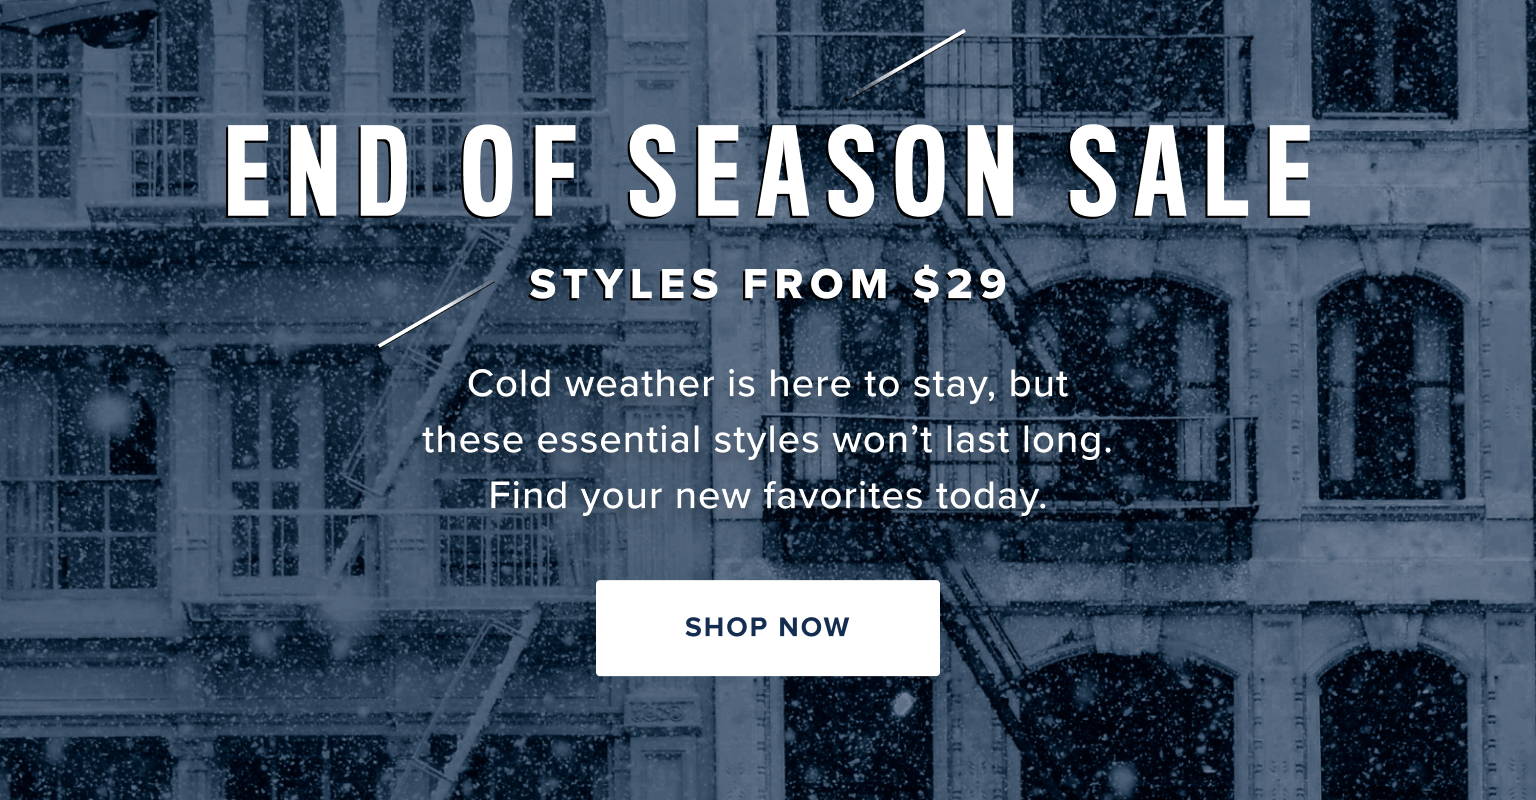 End of season sale. Styles from $29